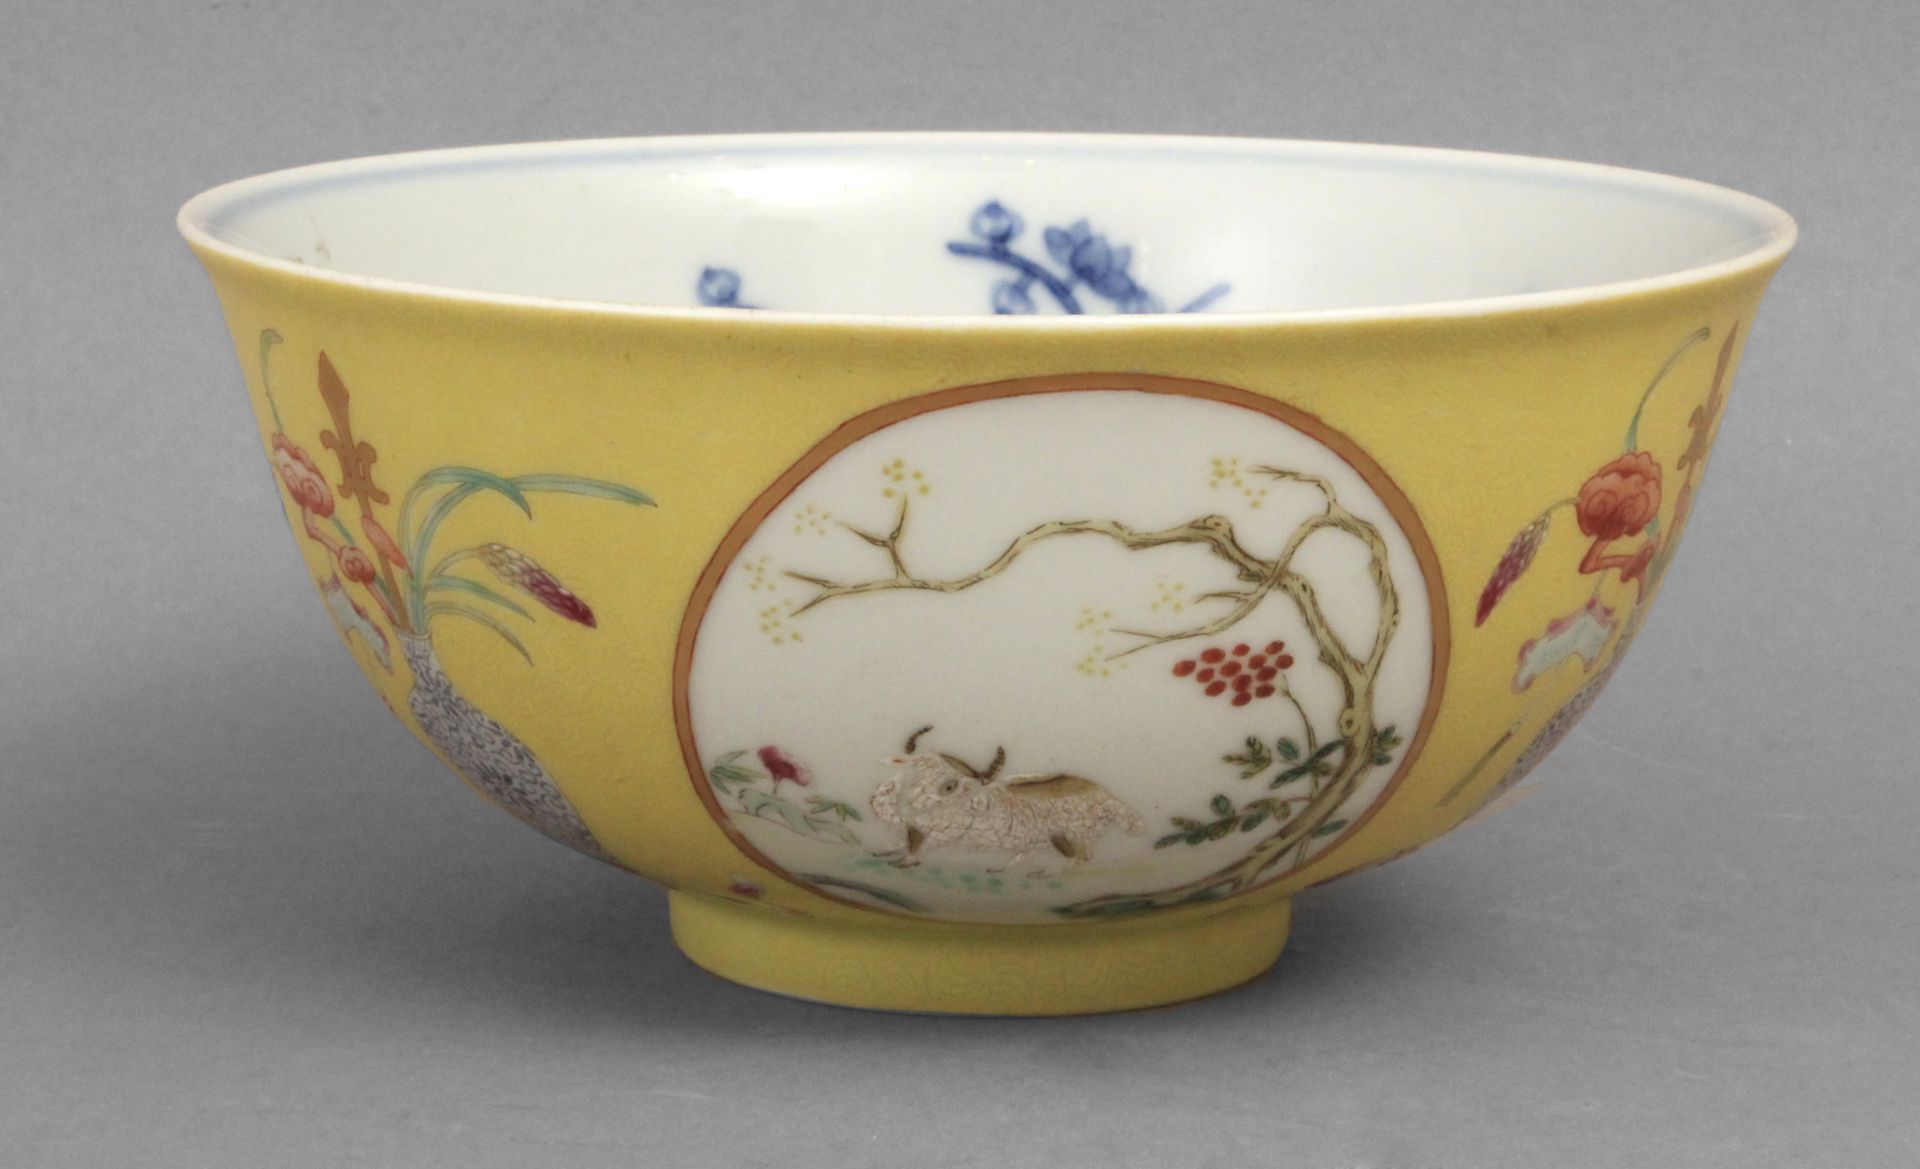 Late 19th century-early 20th century Chinese porcelain bowl